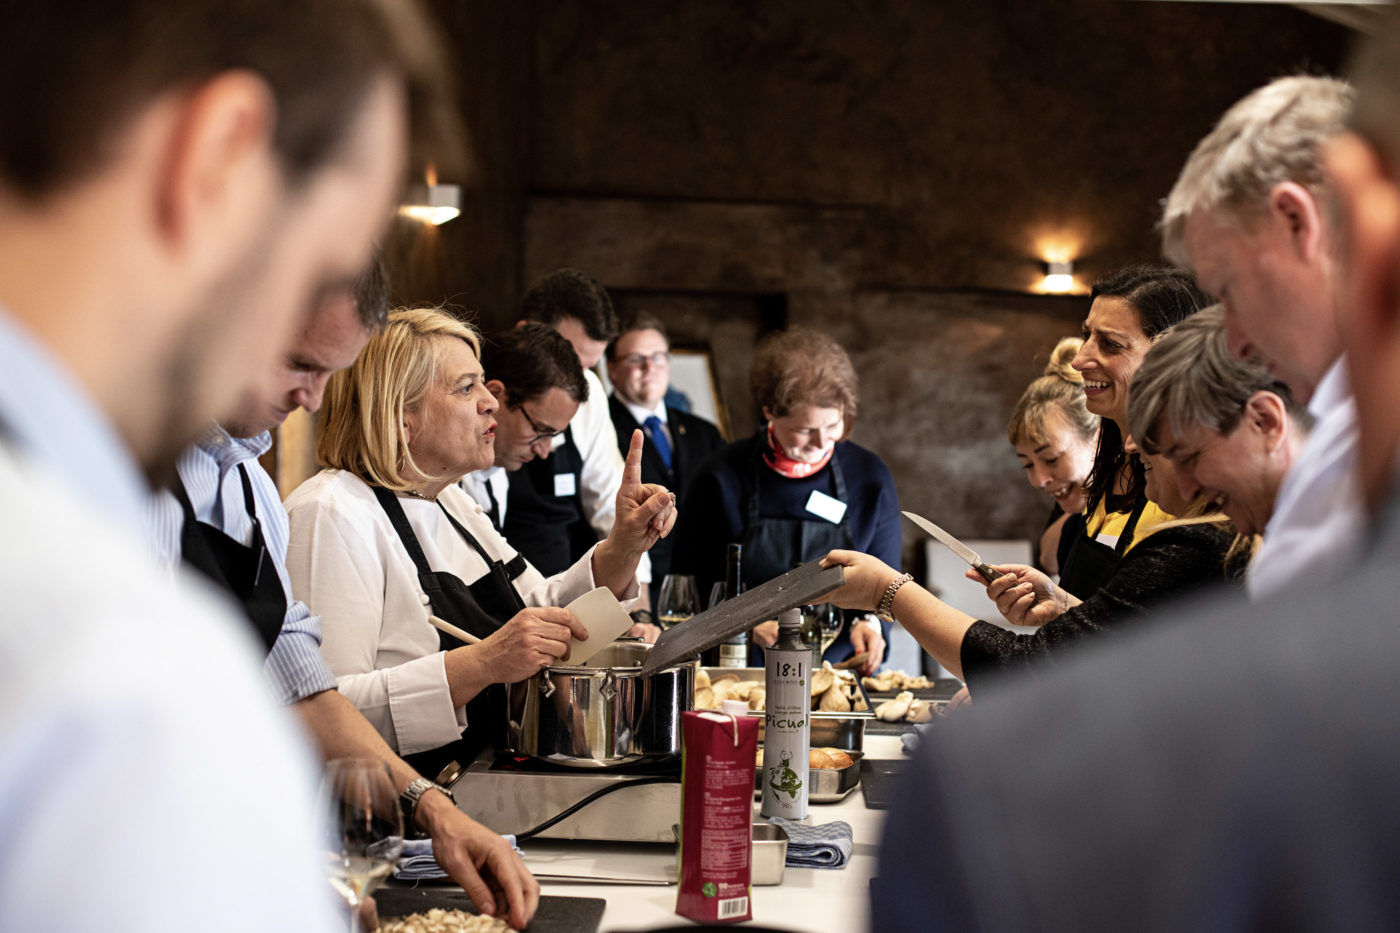 Event PATRIZIA Charity Cooking in Luxembourg mit Deloitte und Clifford Chance 2019 - Lea Linster kocht